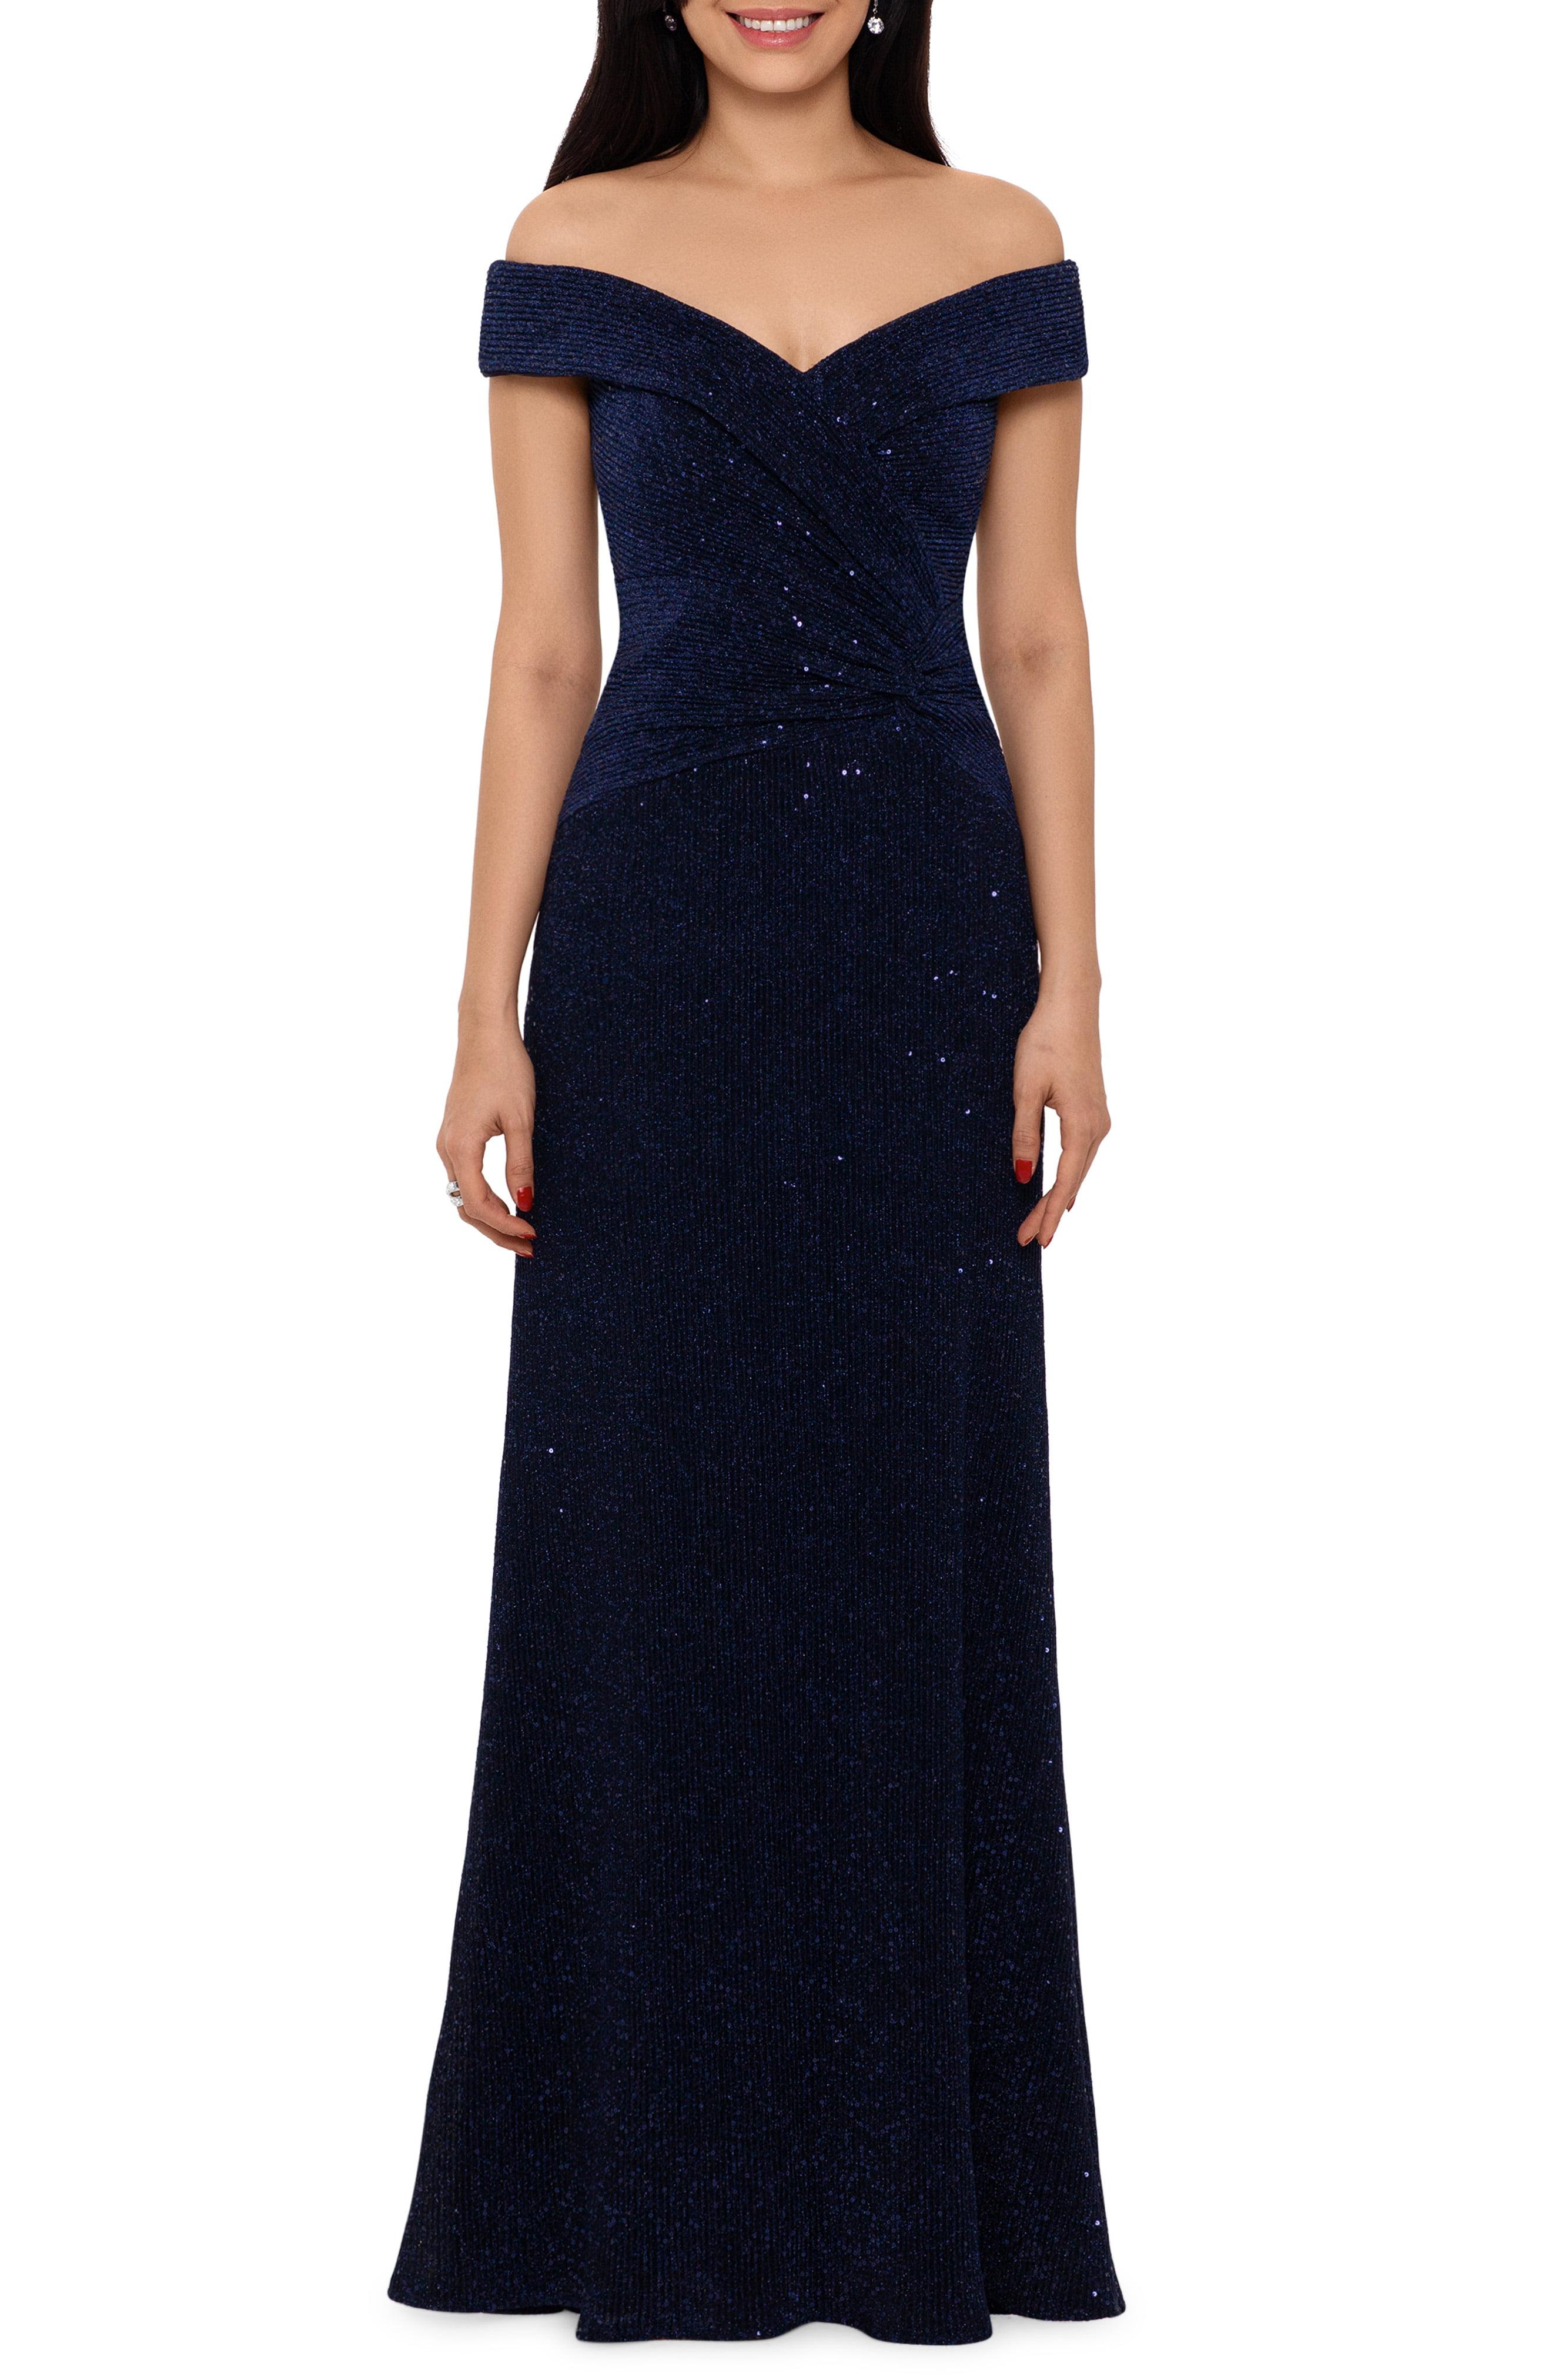 Xscape Off The Shoulder Sequin Gown in Navy (Blue) - Lyst